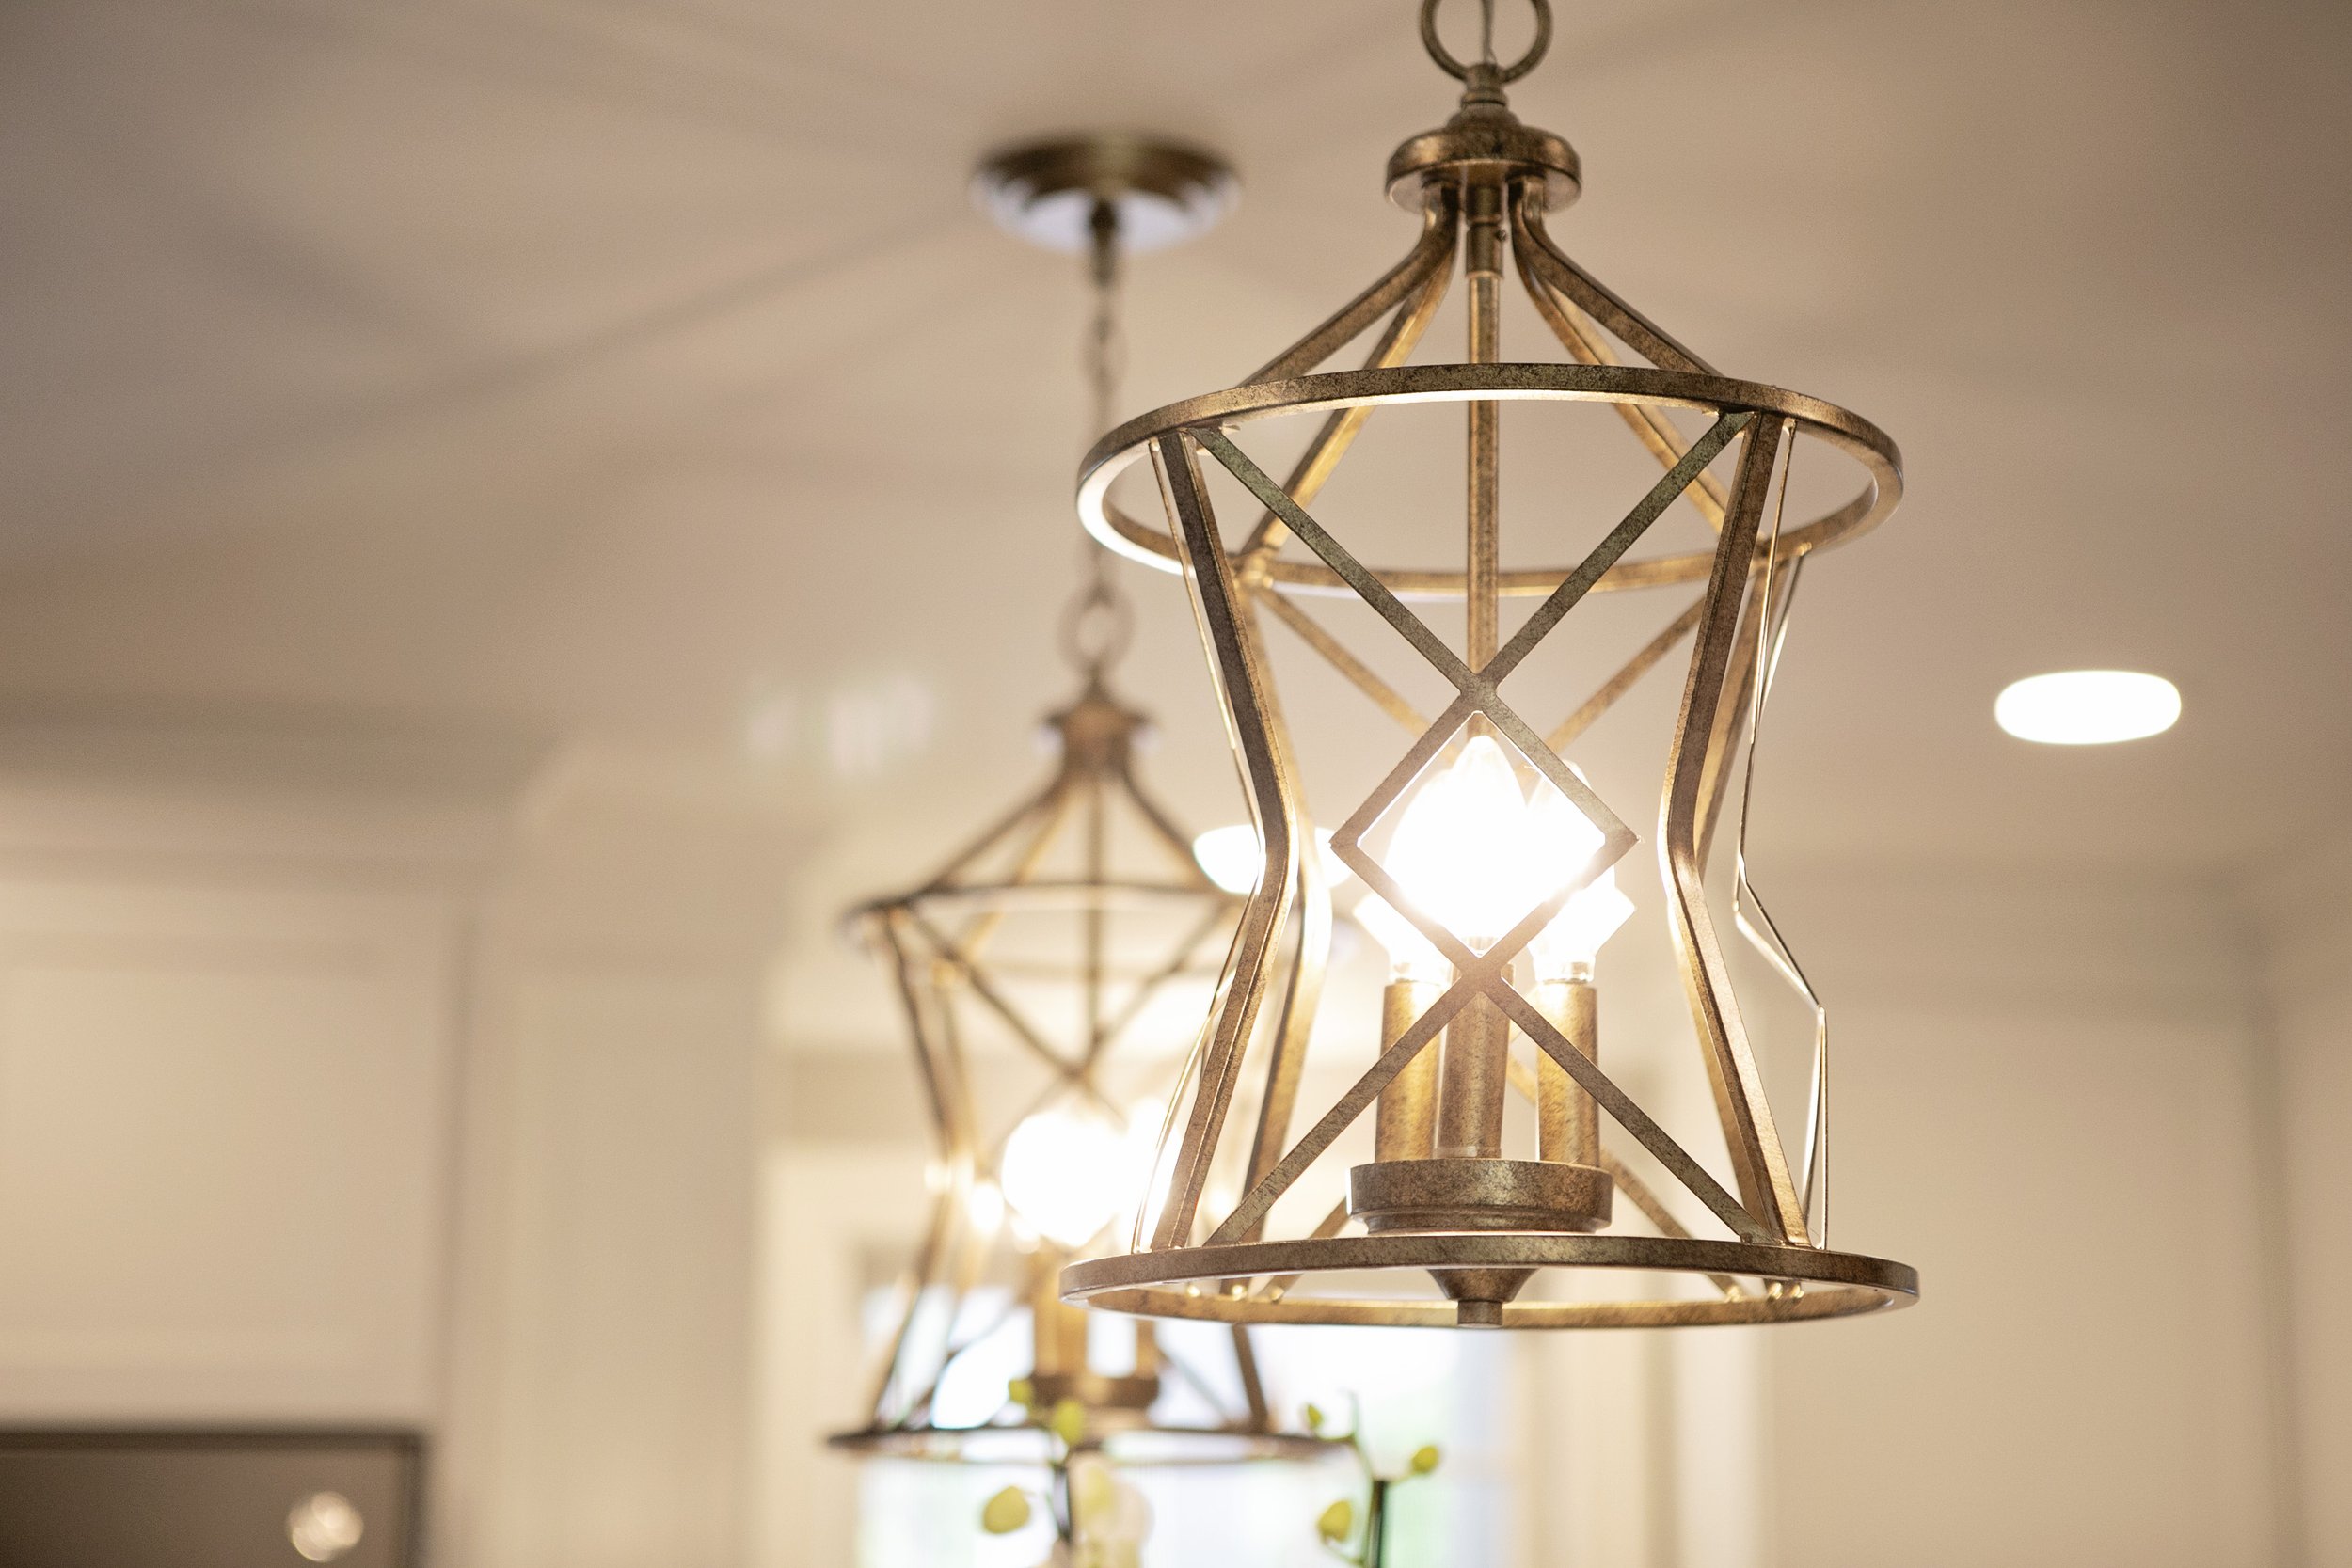 Two Millennium Lighting fixtures (Lakewood in Vintage Gold) hang centered over the kitchen island.